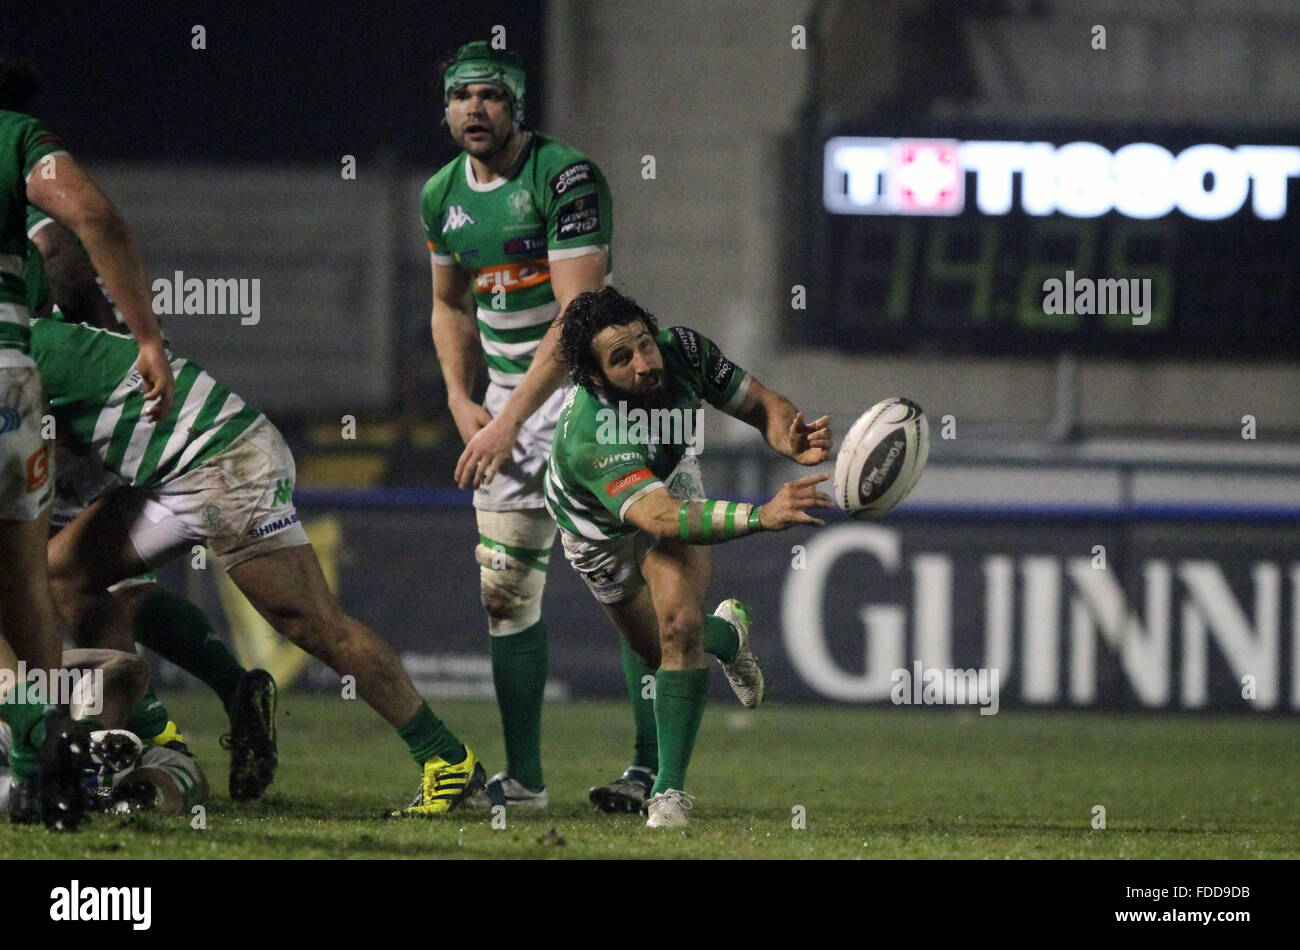 Treviso, Italy. 30th January, 2016. Treviso's player Alberto Lucchese passes the ball during Rugby Guinness Pro12 match  between Benetton Treviso and Ulster on 30th January, 2016. Credit:  Andrea Spinelli/Alamy Live News Stock Photo